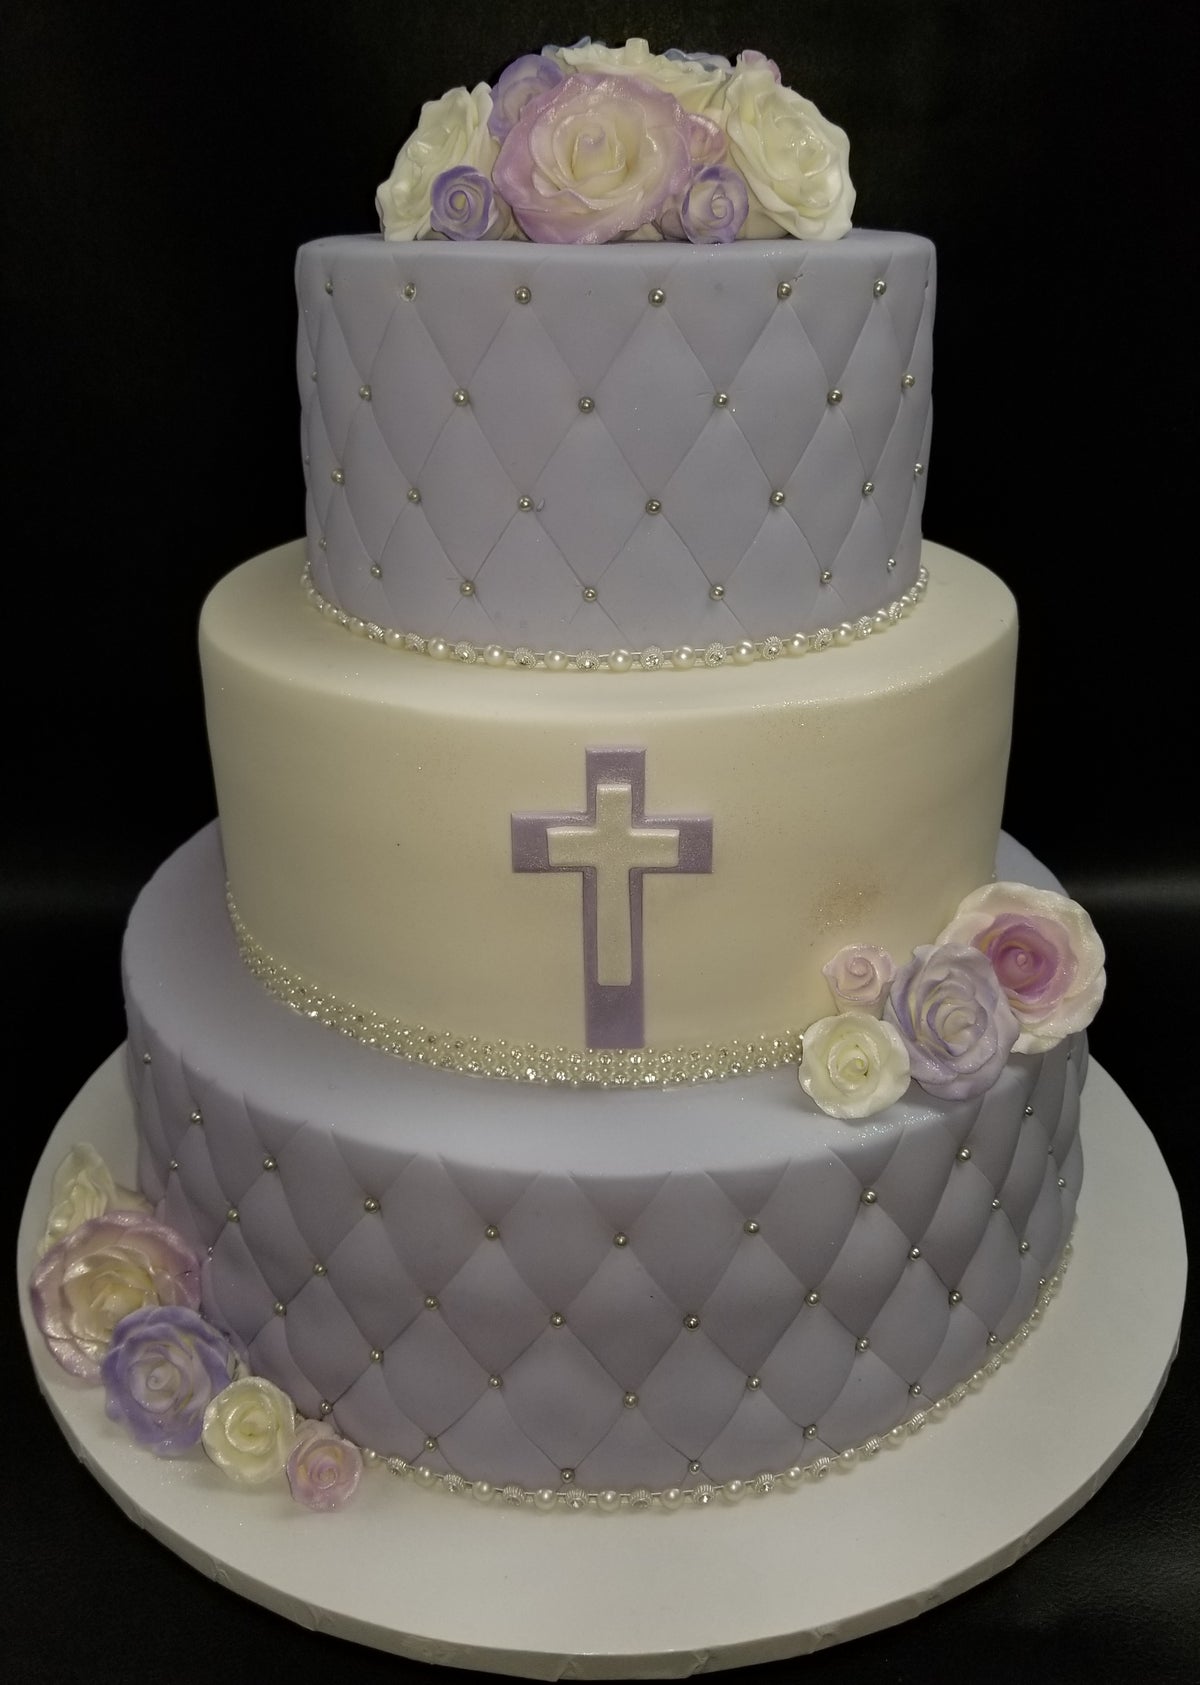 Purple and white with sugar roses. R061